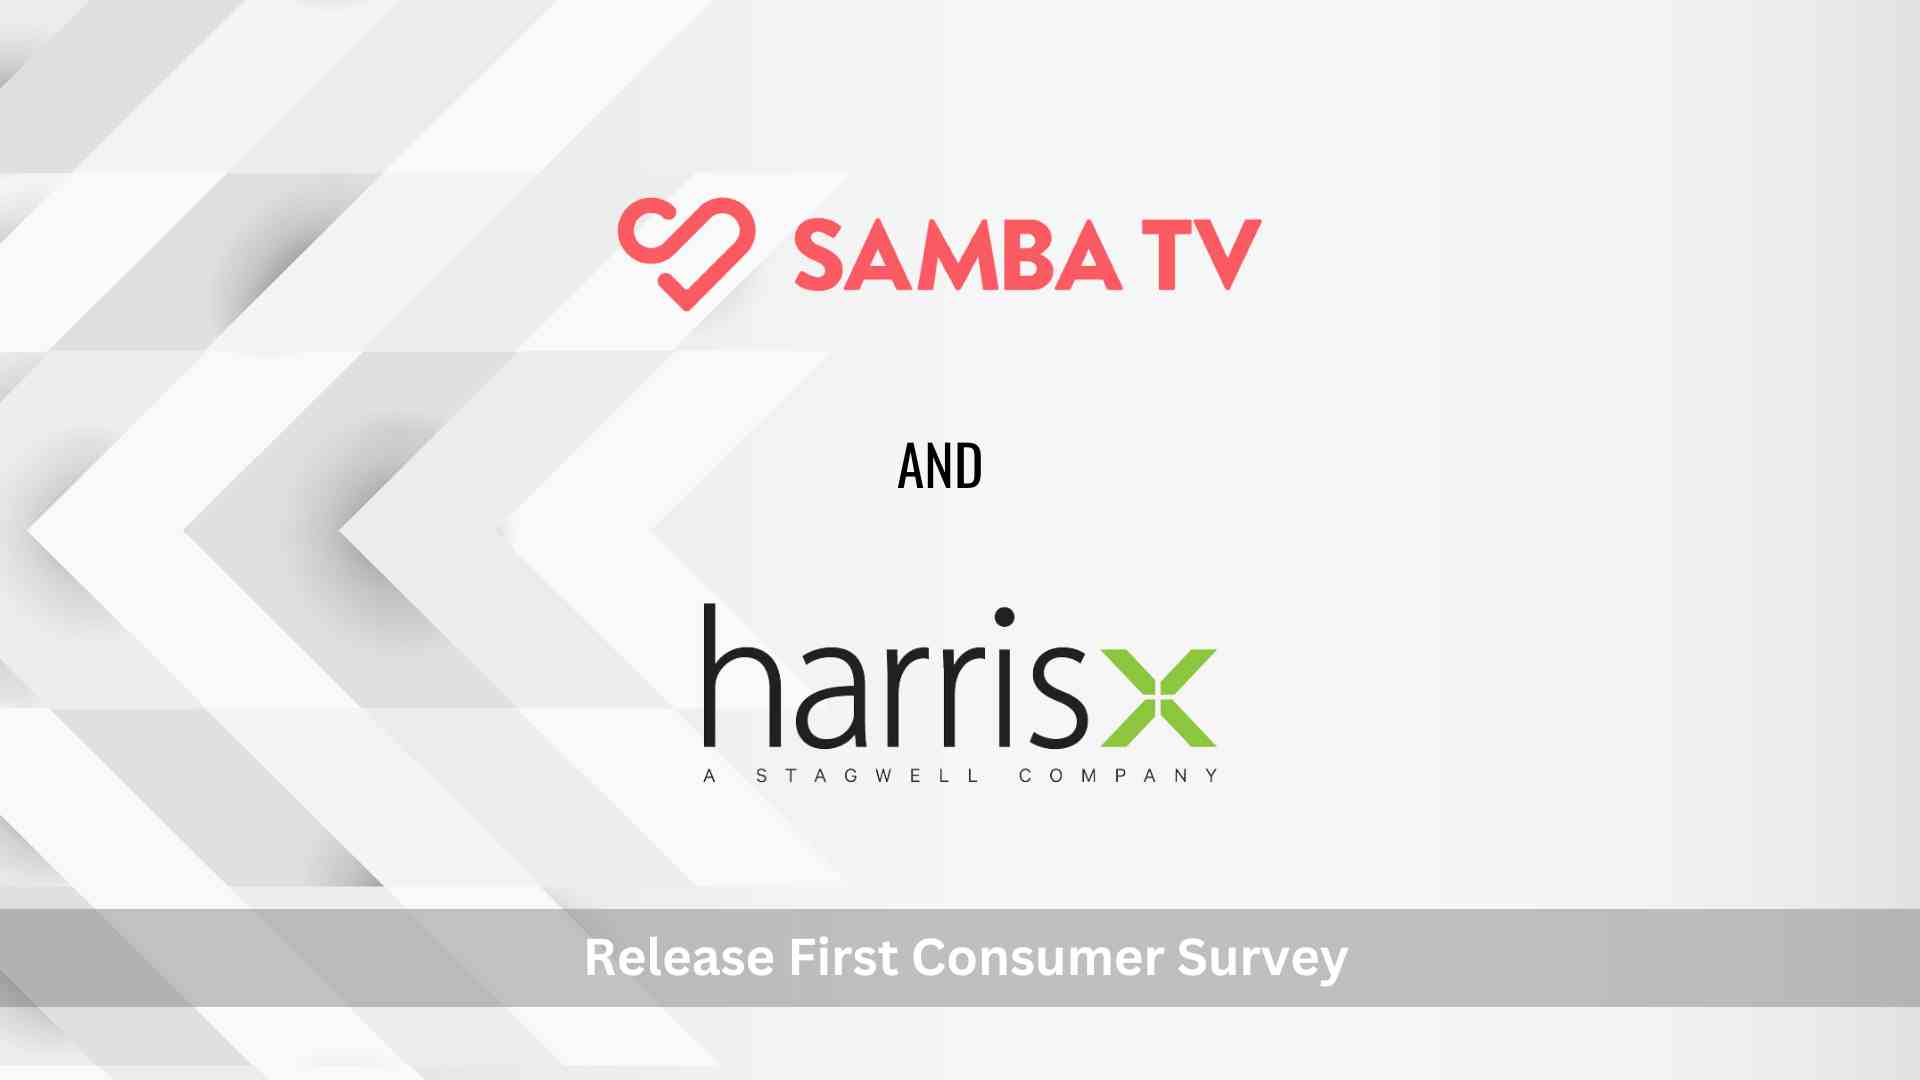 Samba TV and HarrisX Release First Consumer Survey of the Holiday Shopping Season Showing Consumers are Concerned About Turbulent Economic Outlook But Not Planning To Reduce Spending